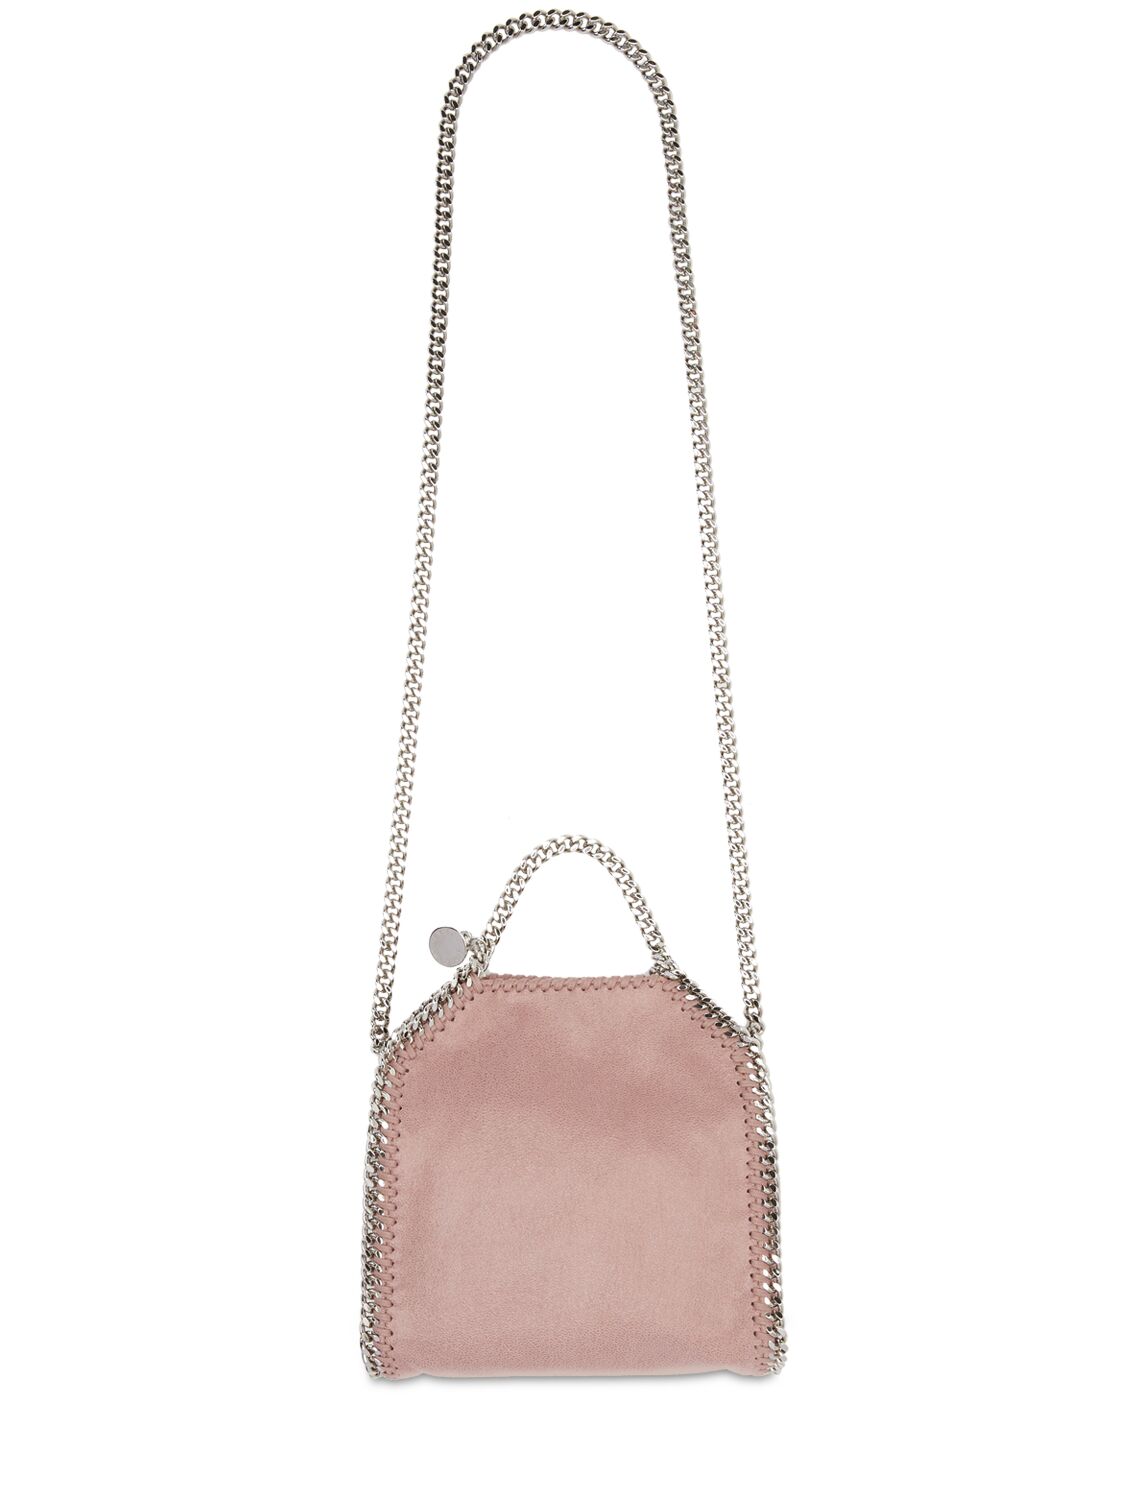 Stella Mccartney Tiny Falabella Faux Leather Bag In Pink